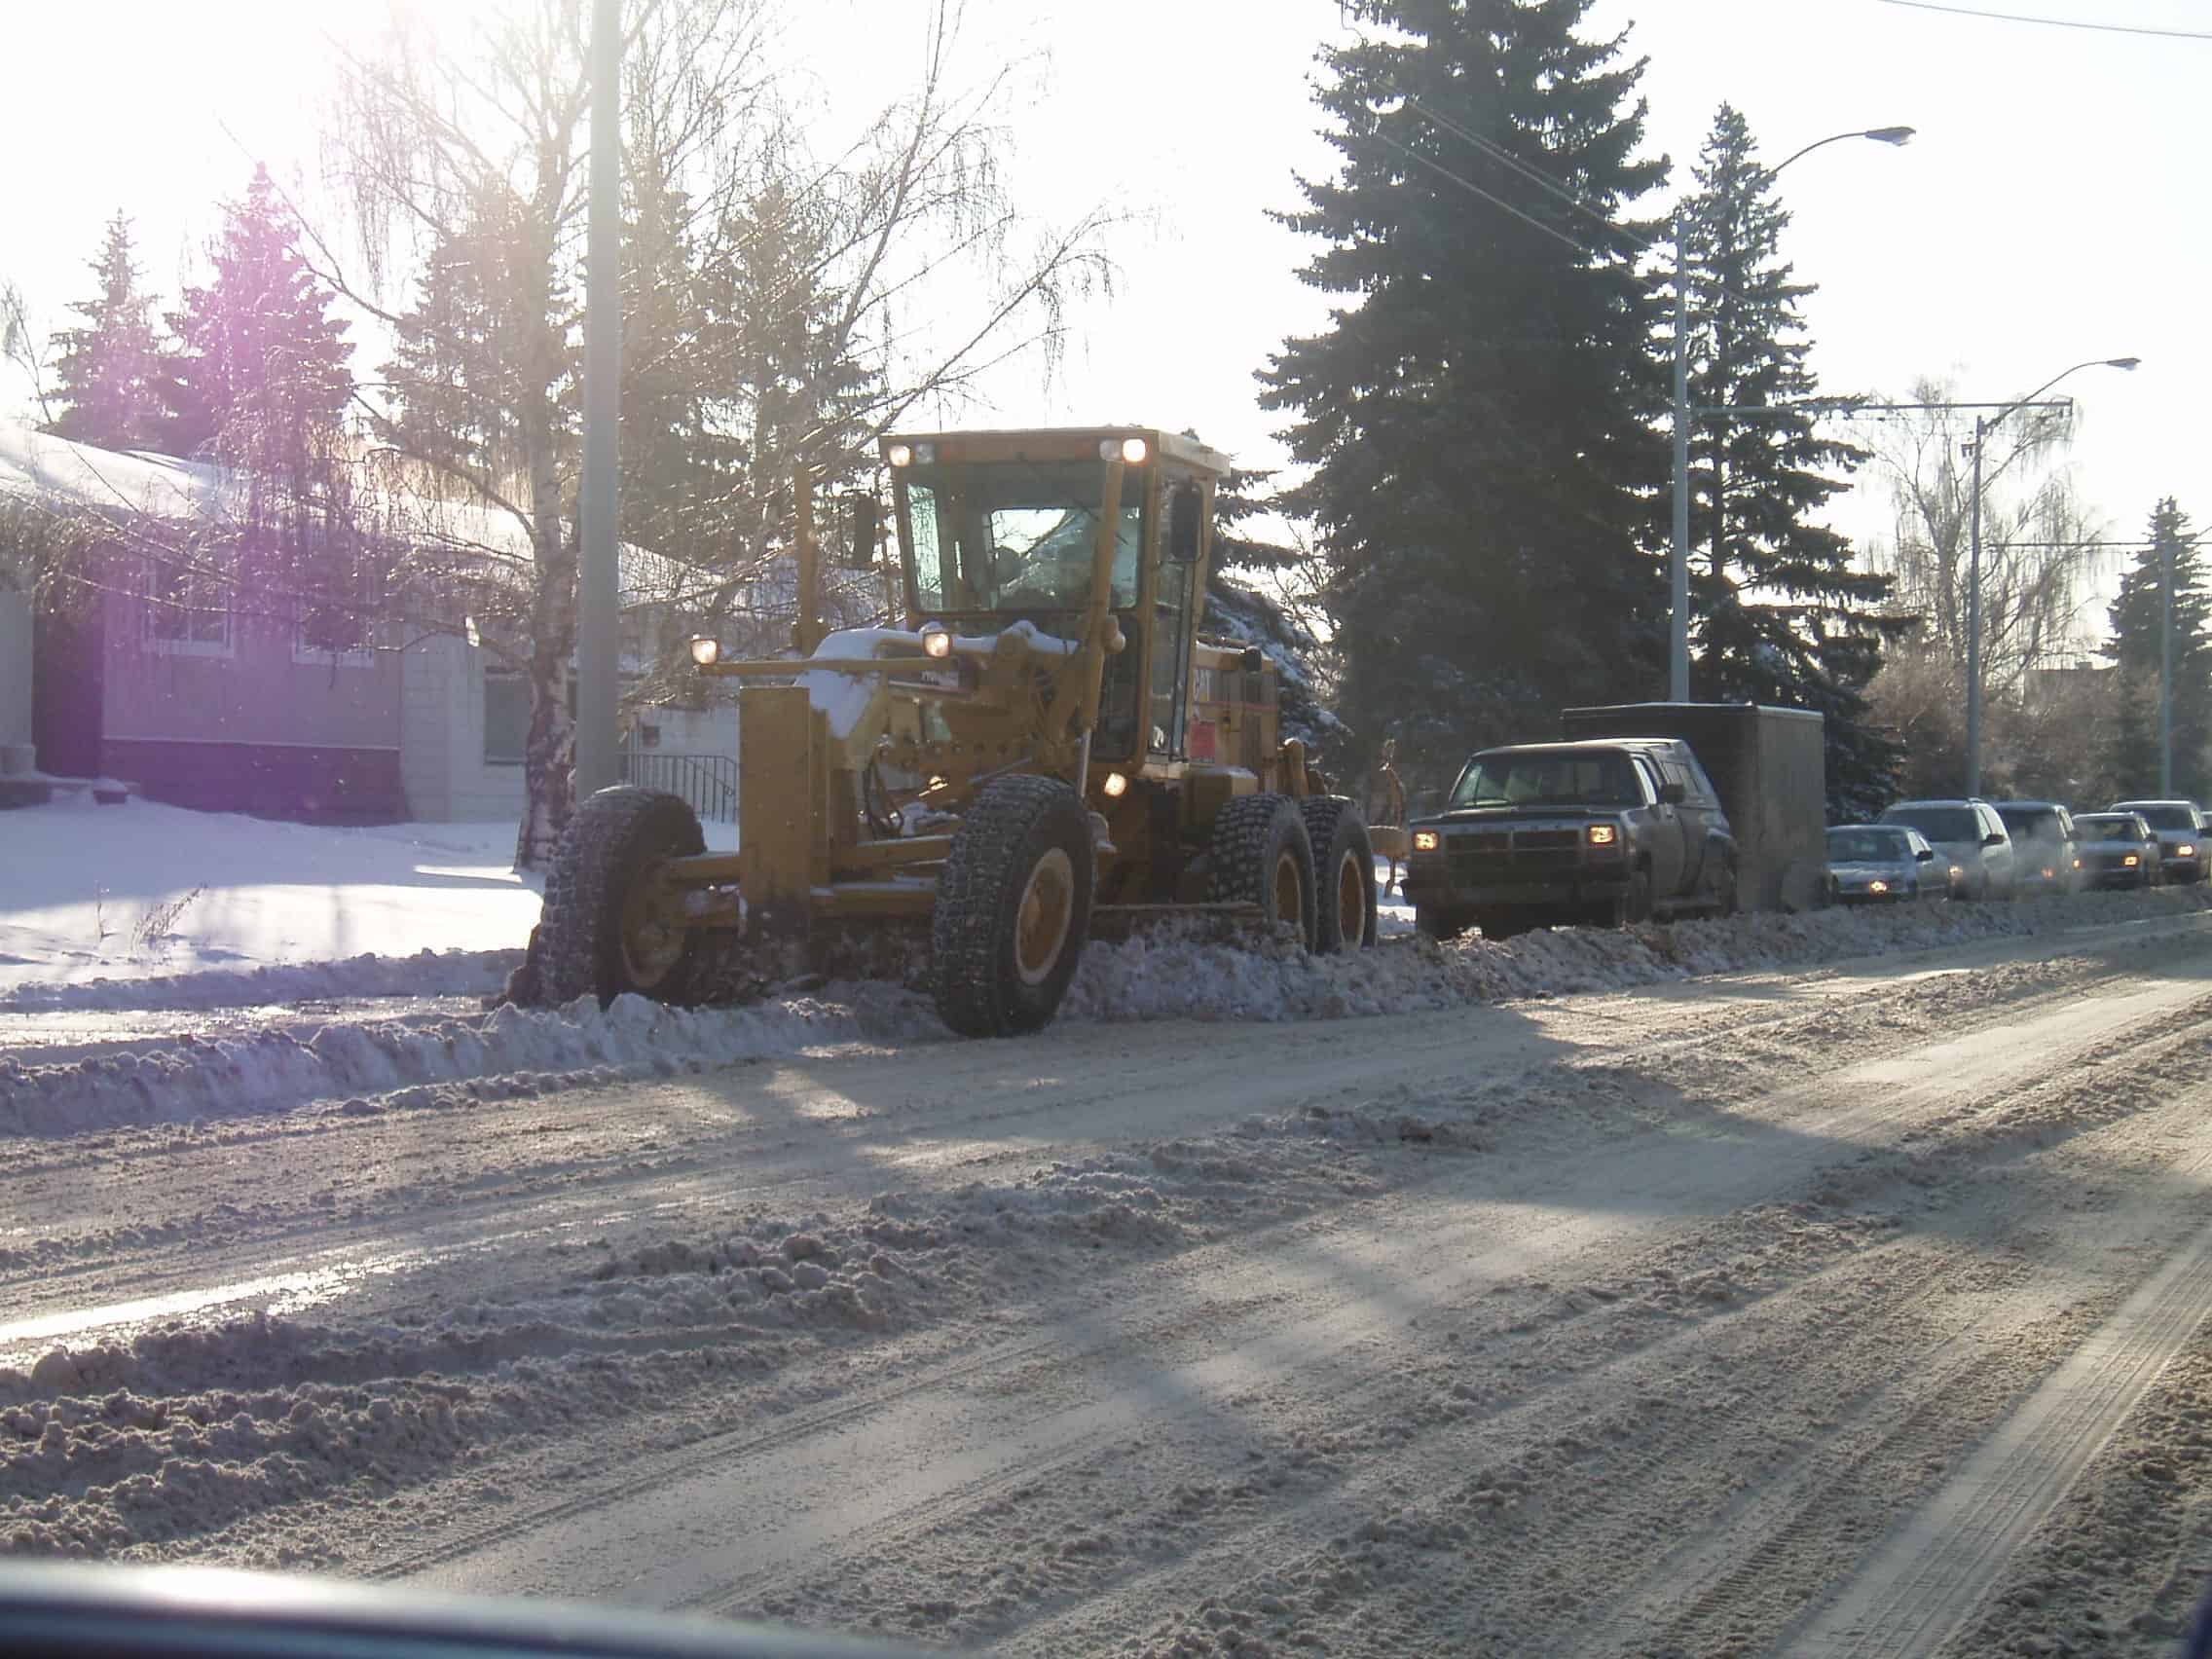 Clearing roads and sidewalks during winter